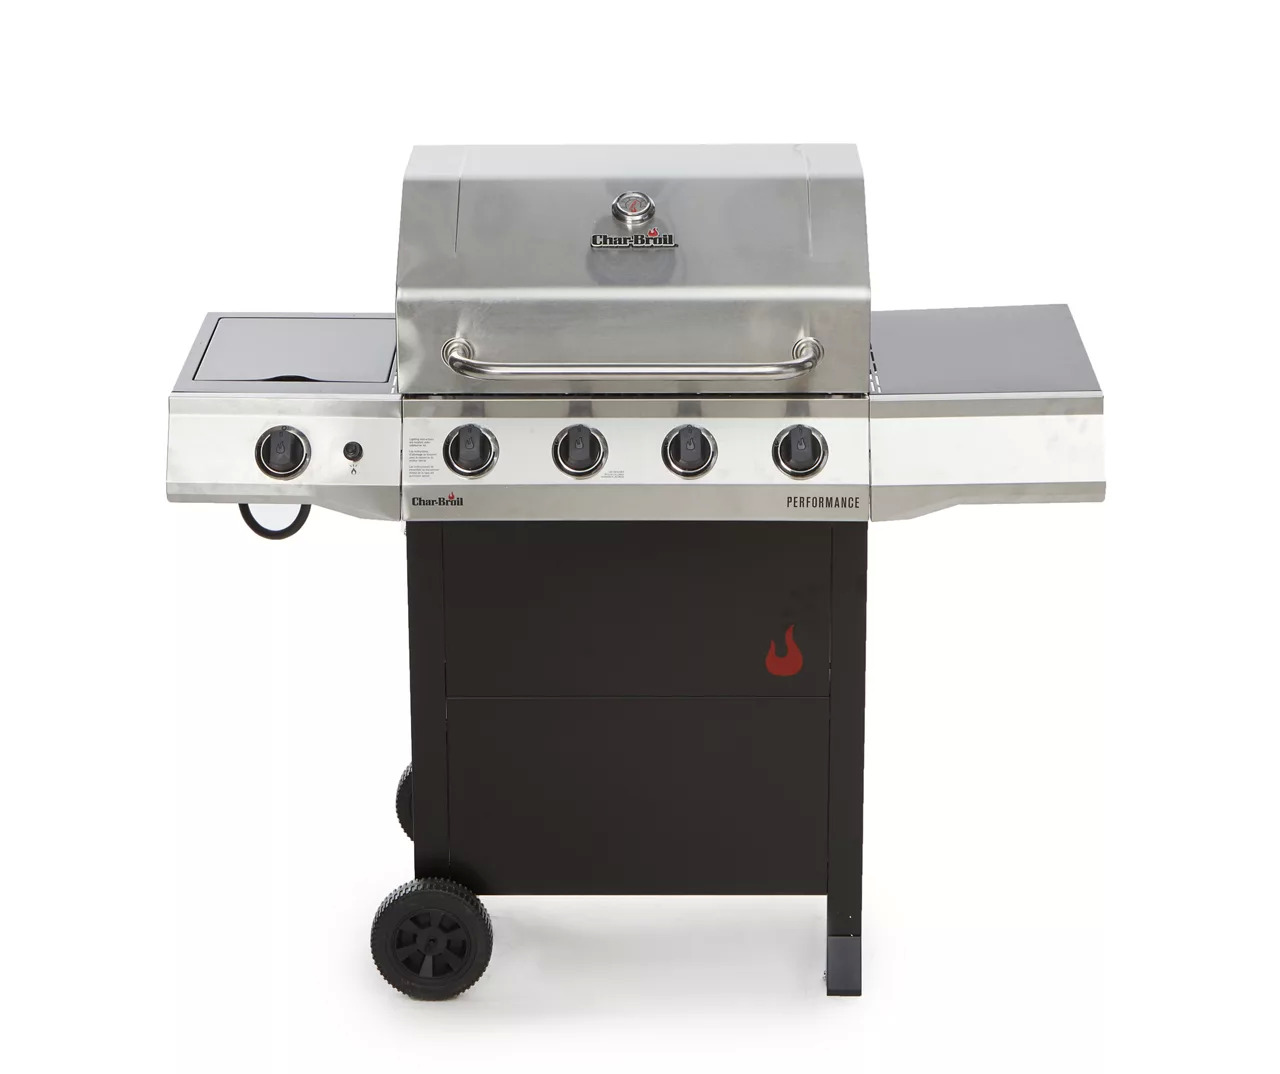 Char-Broil Performance Series 4-Burner Gas Grill - $169.99 with 15% off WELCOME15